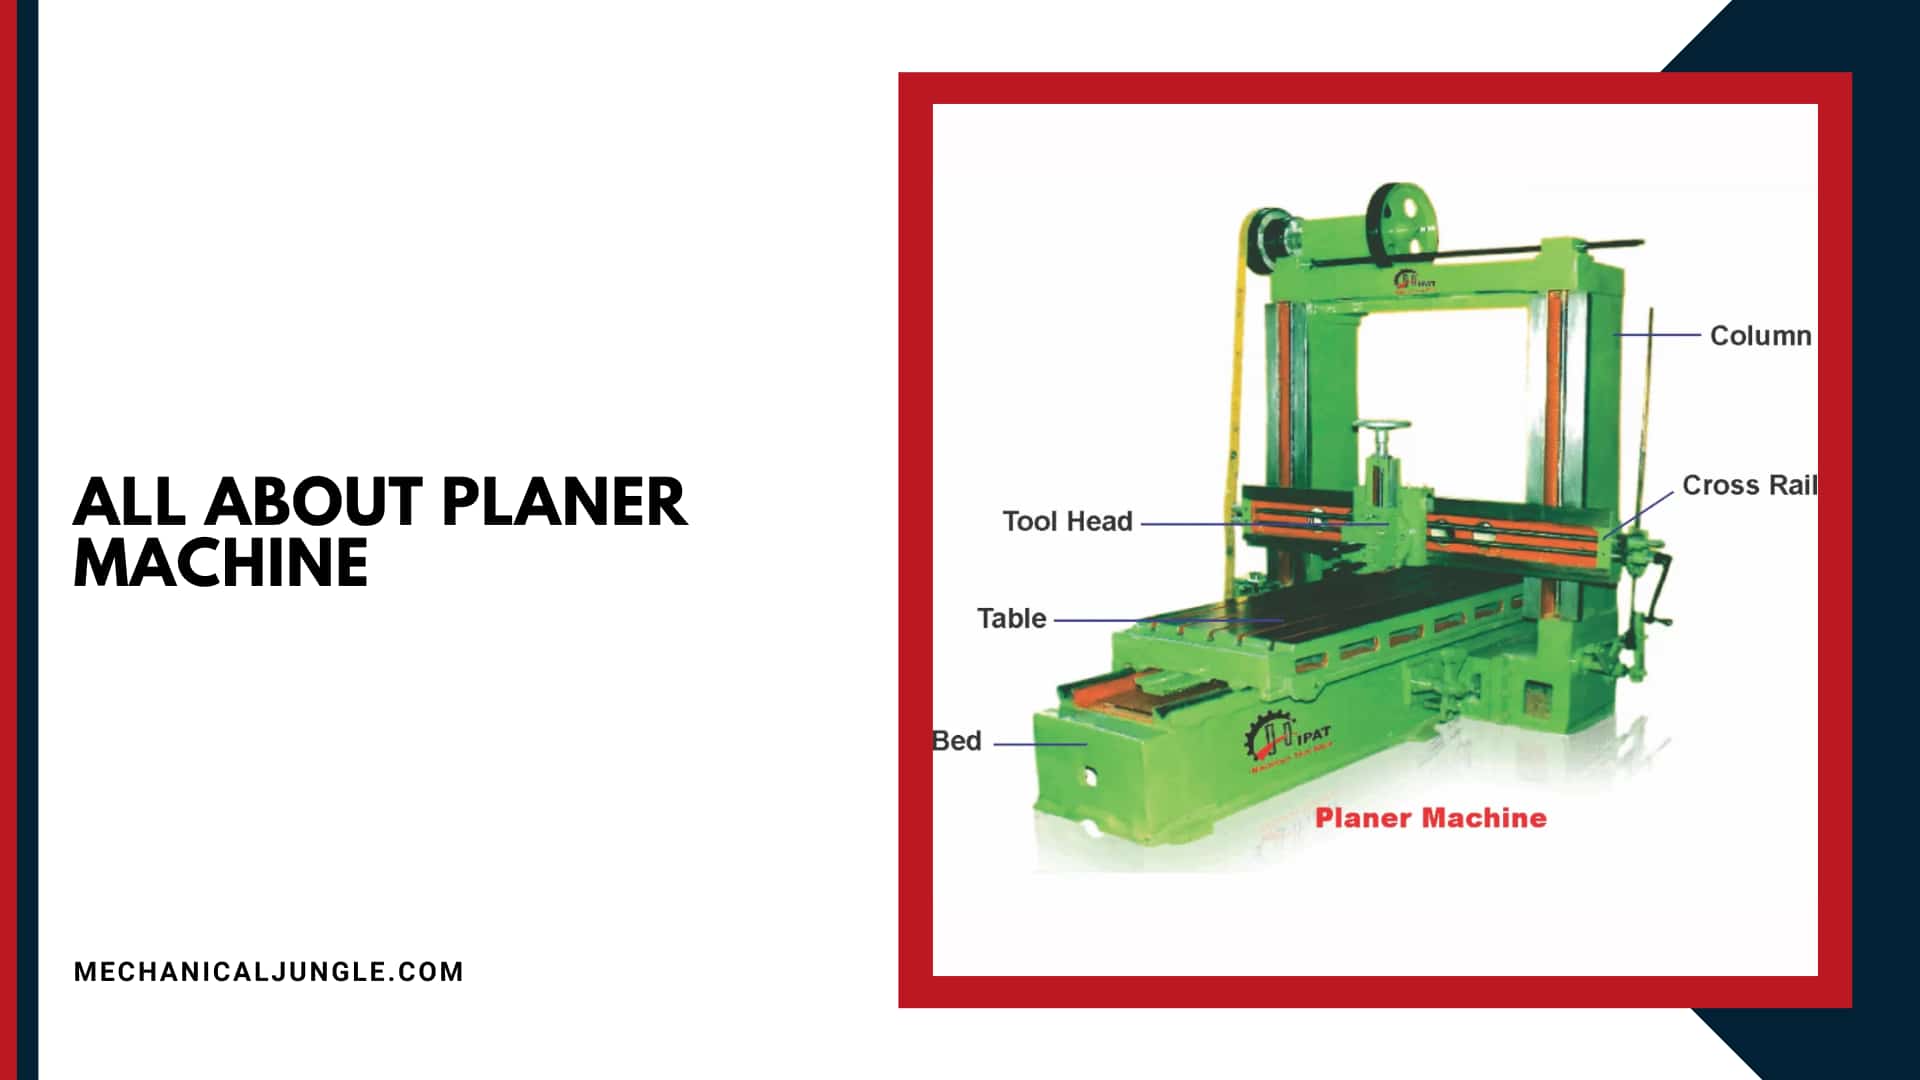 All About Planer Machine